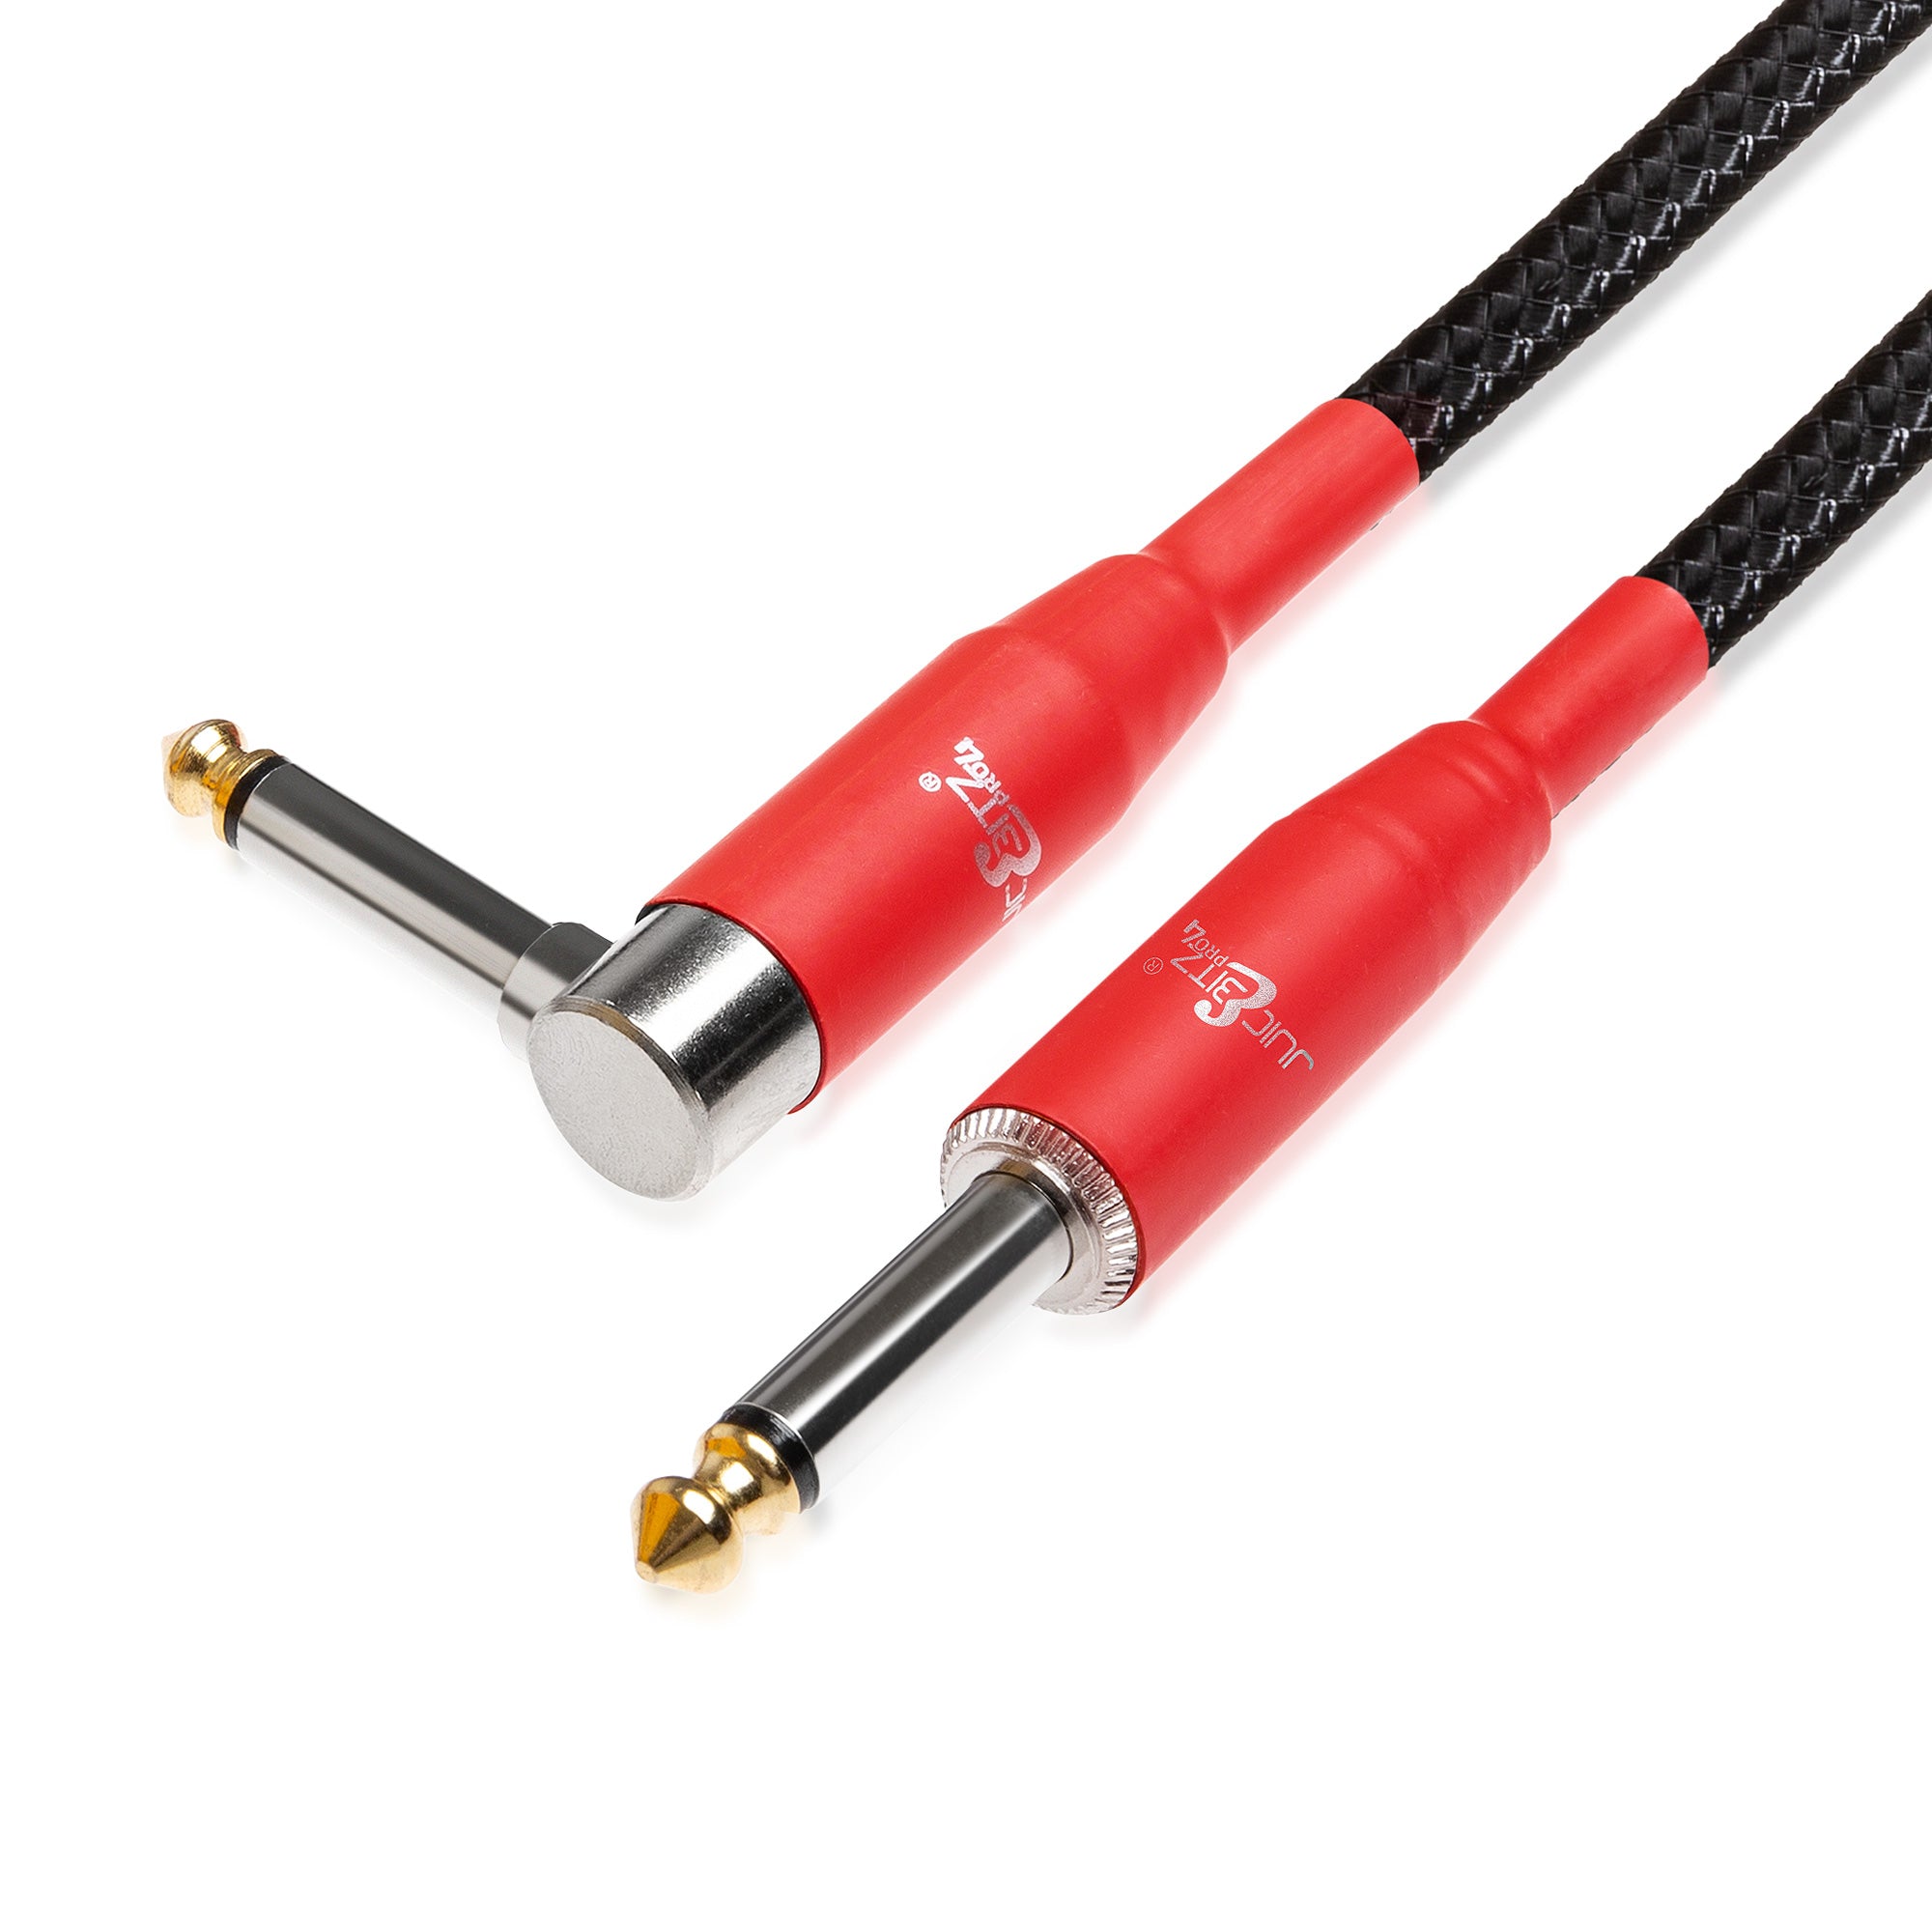 PRO Series Braided Guitar Cable 1/4" Straight/Angled Jack to Jack 6.35mm Lead - Black